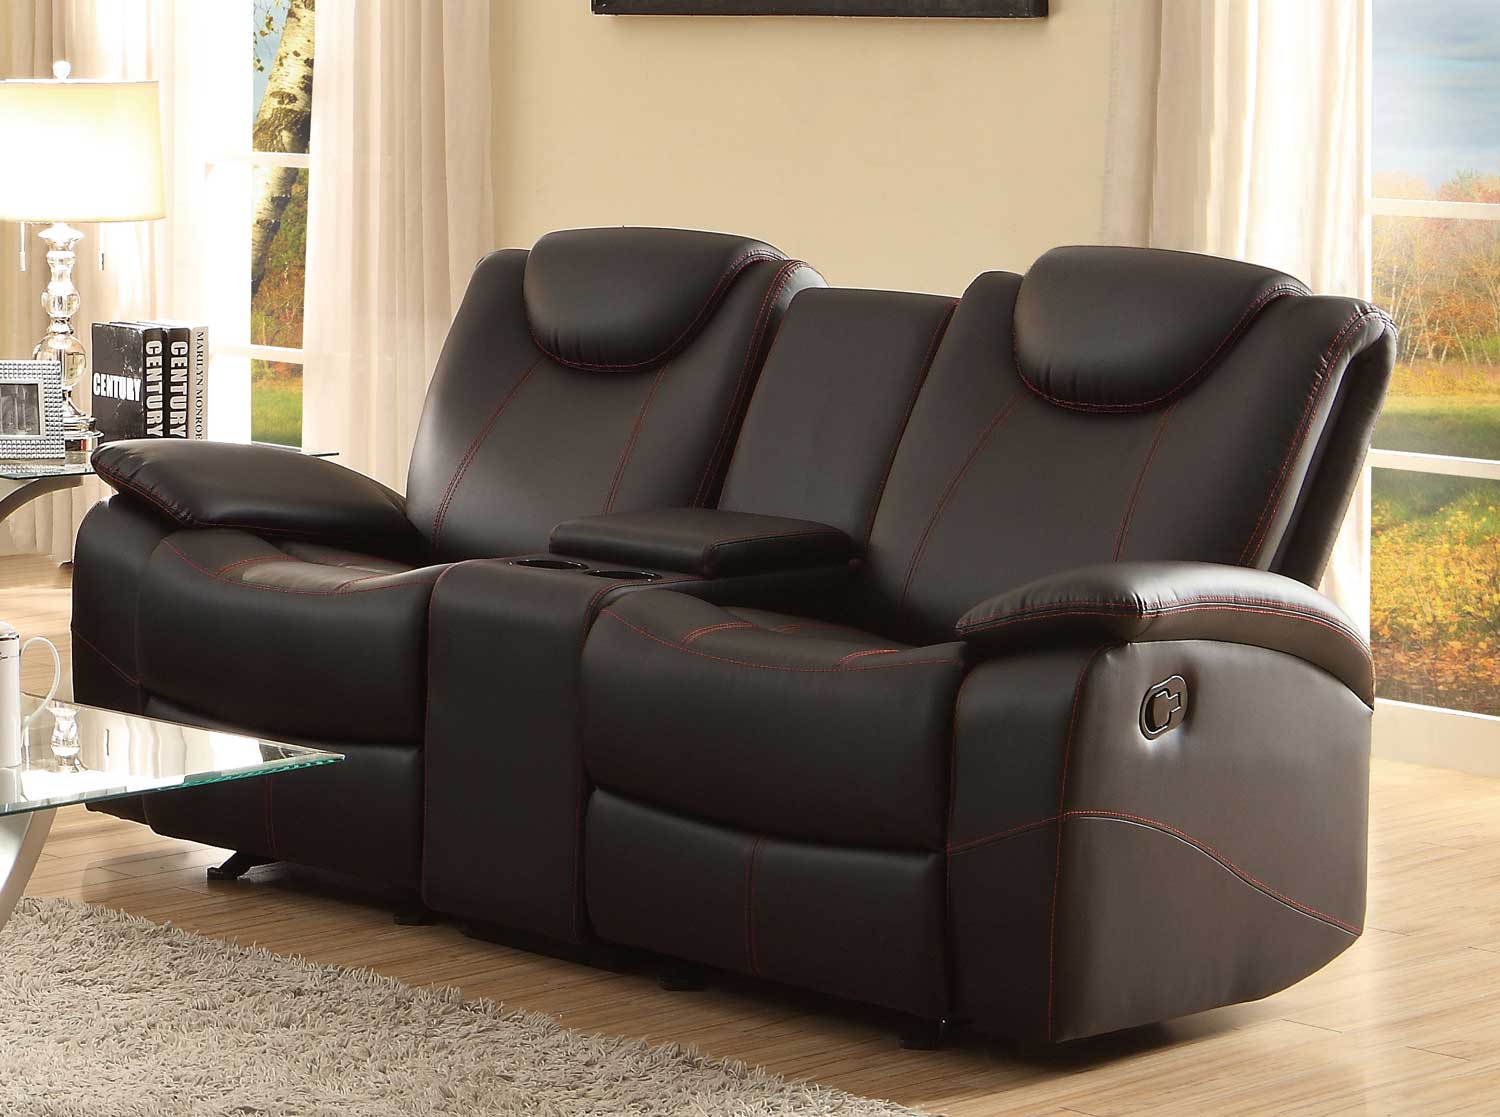 leather reclining loveseat with console new leather reclining loveseat with center console 57 about remodel JHZNNWD